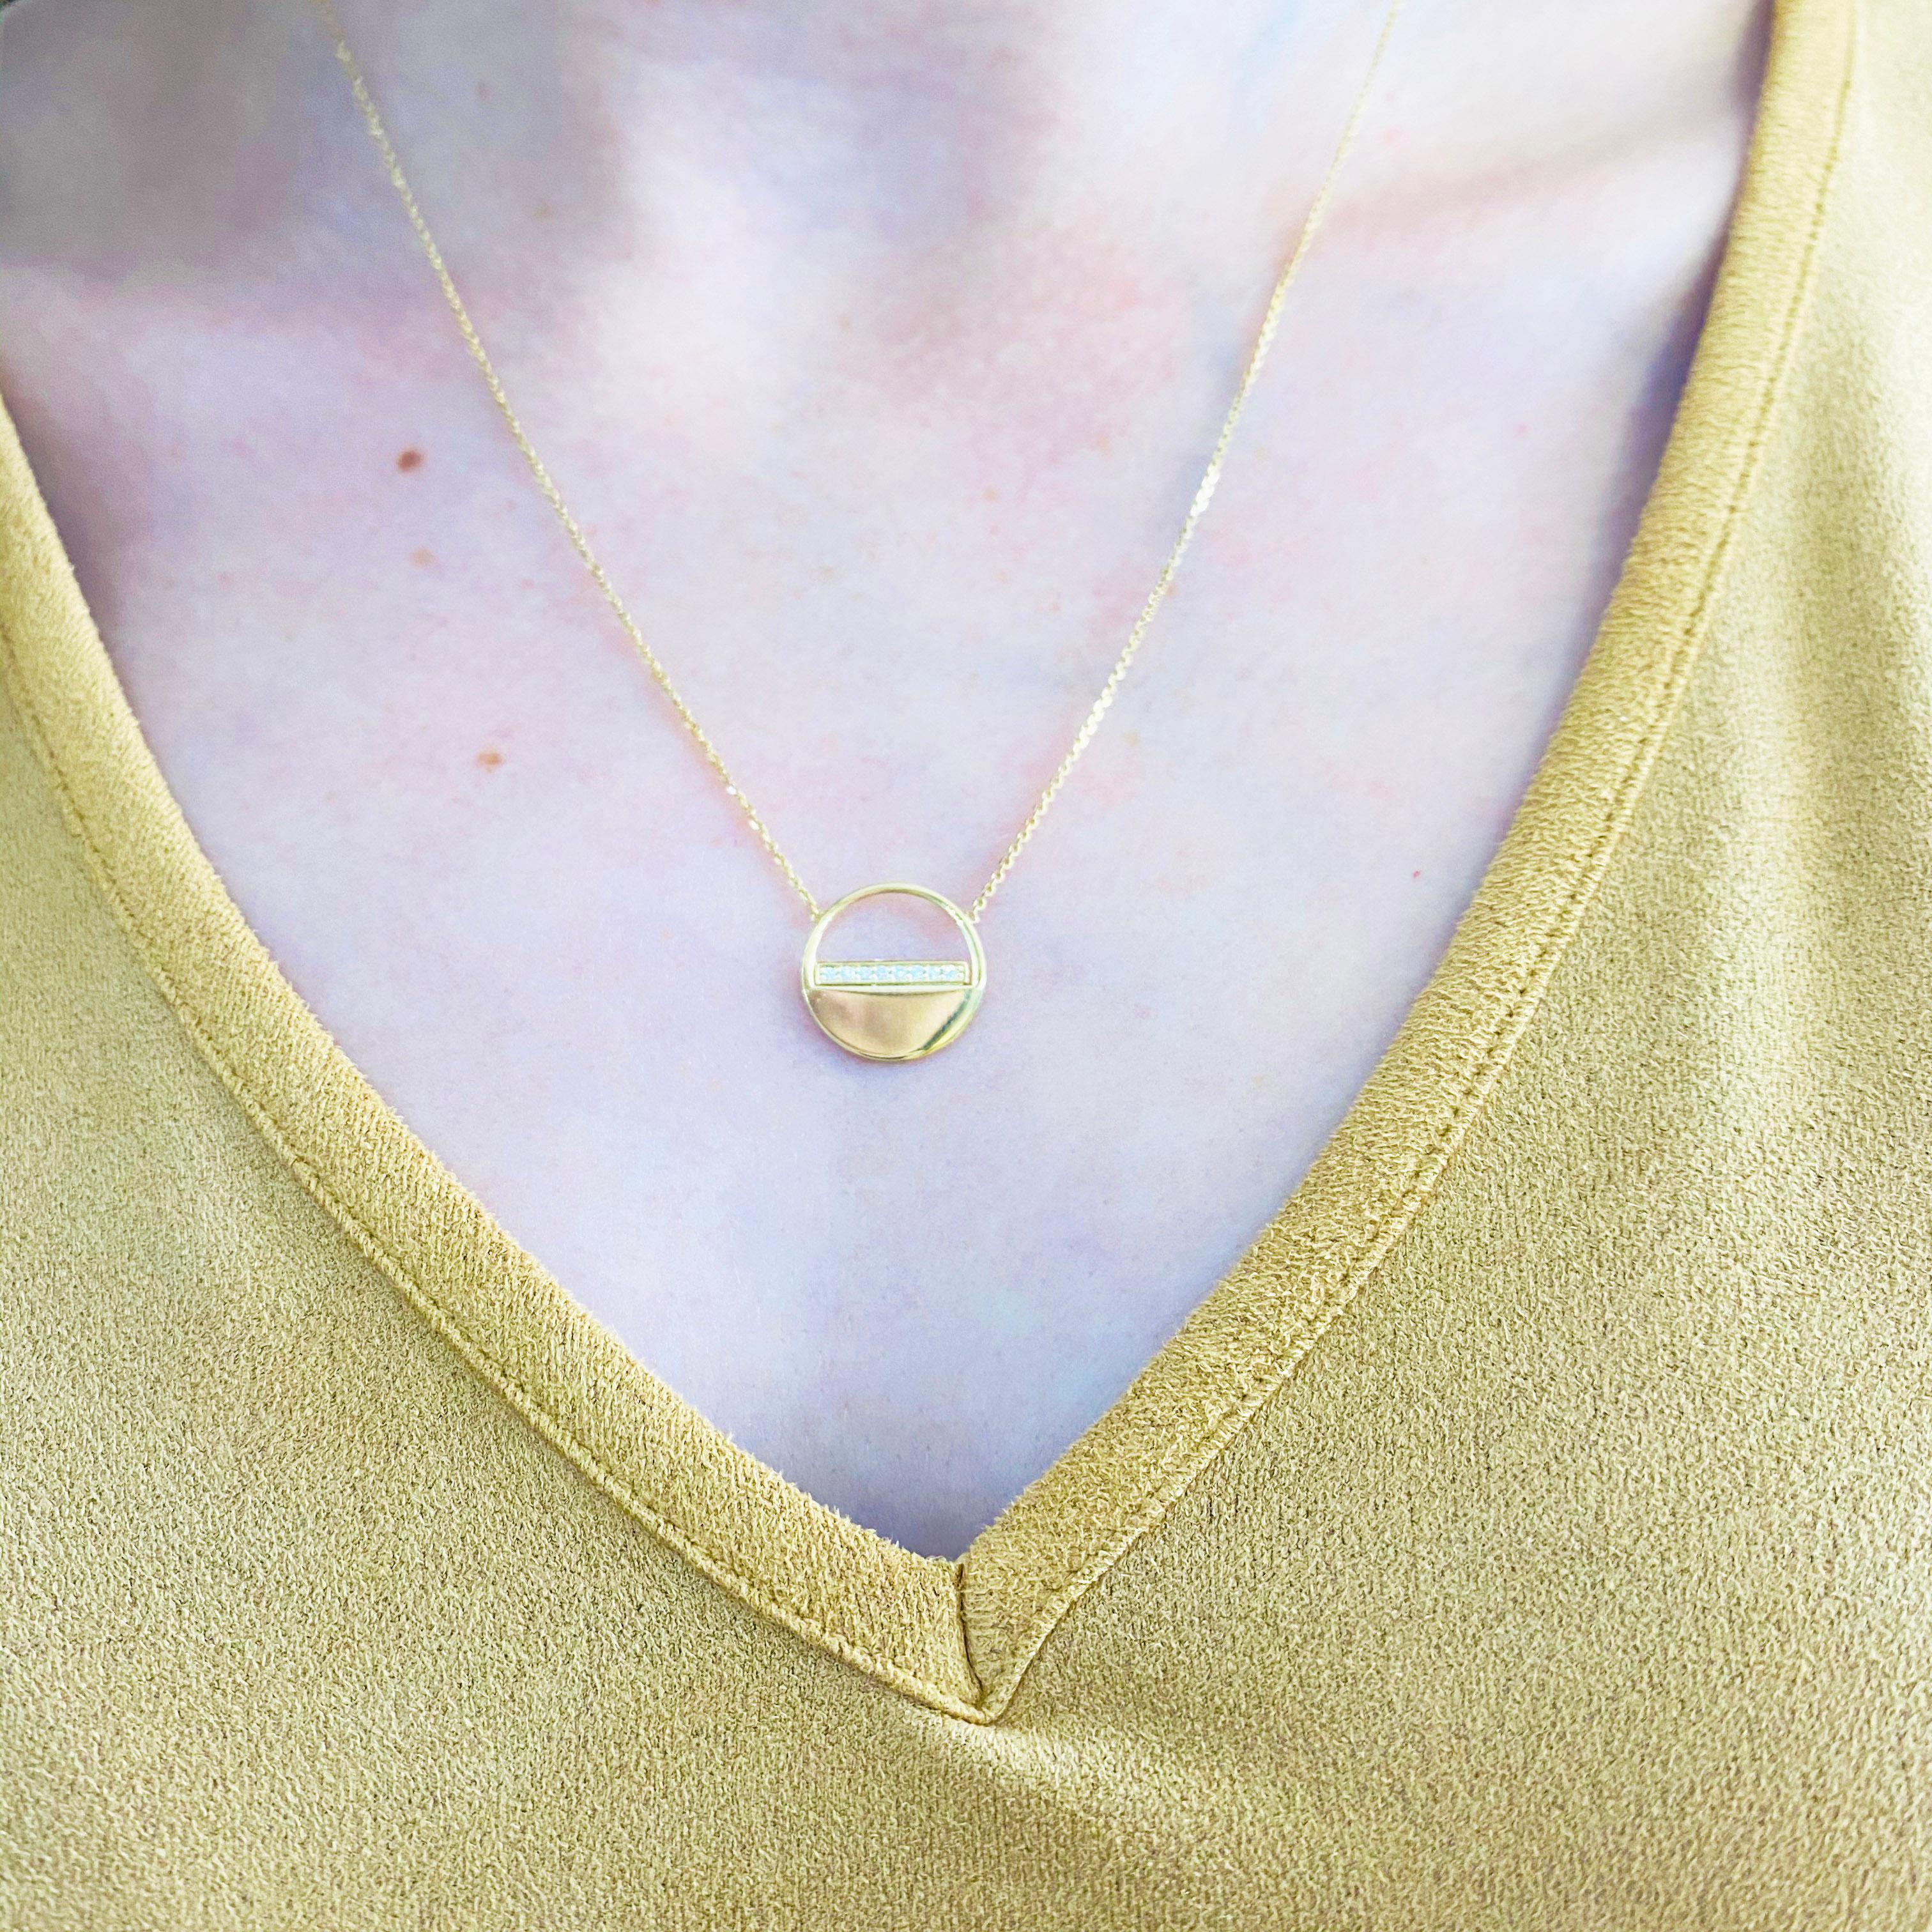 This gorgeous 14k yellow gold disk pendant dripping with diamonds is the perfect mix between classic and trendy! This necklace is very fashionable and can add a touch of style to any outfit, yet it is also classy enough to pair easily with formal